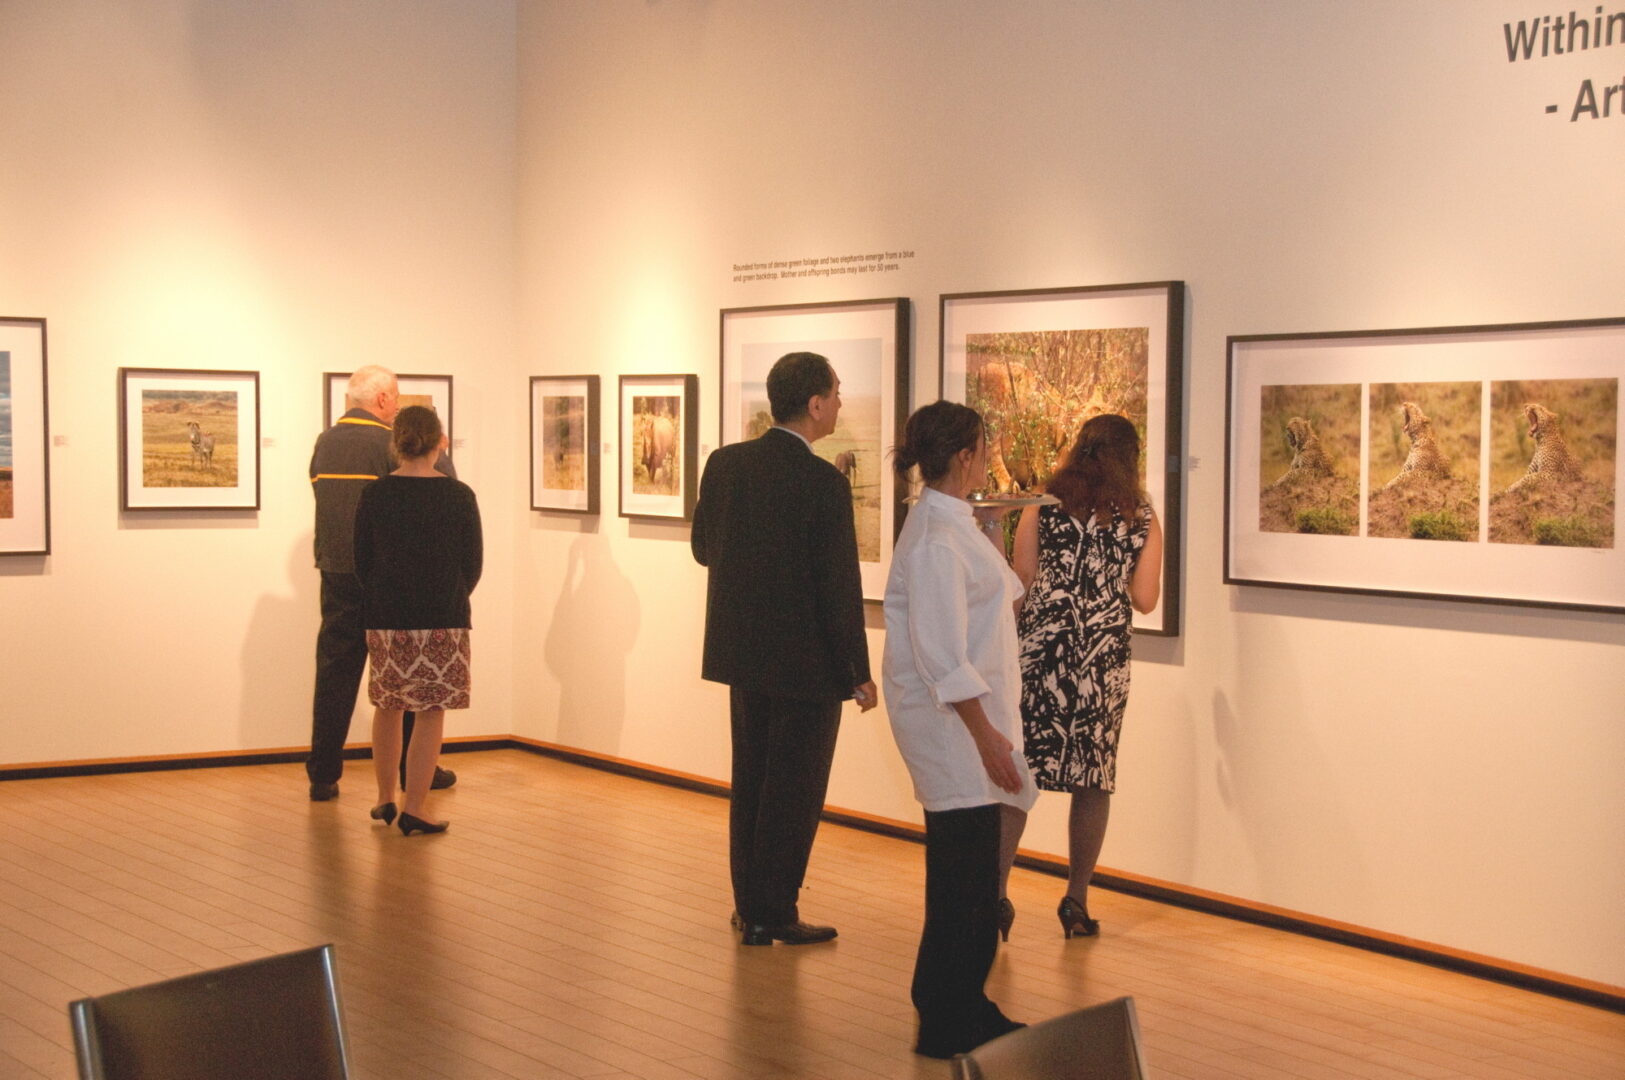 Gallery patrons at The Roberta Bondar Foundation's second Traveling Exhibition and Learning Experience, Art Gallery of Algoma